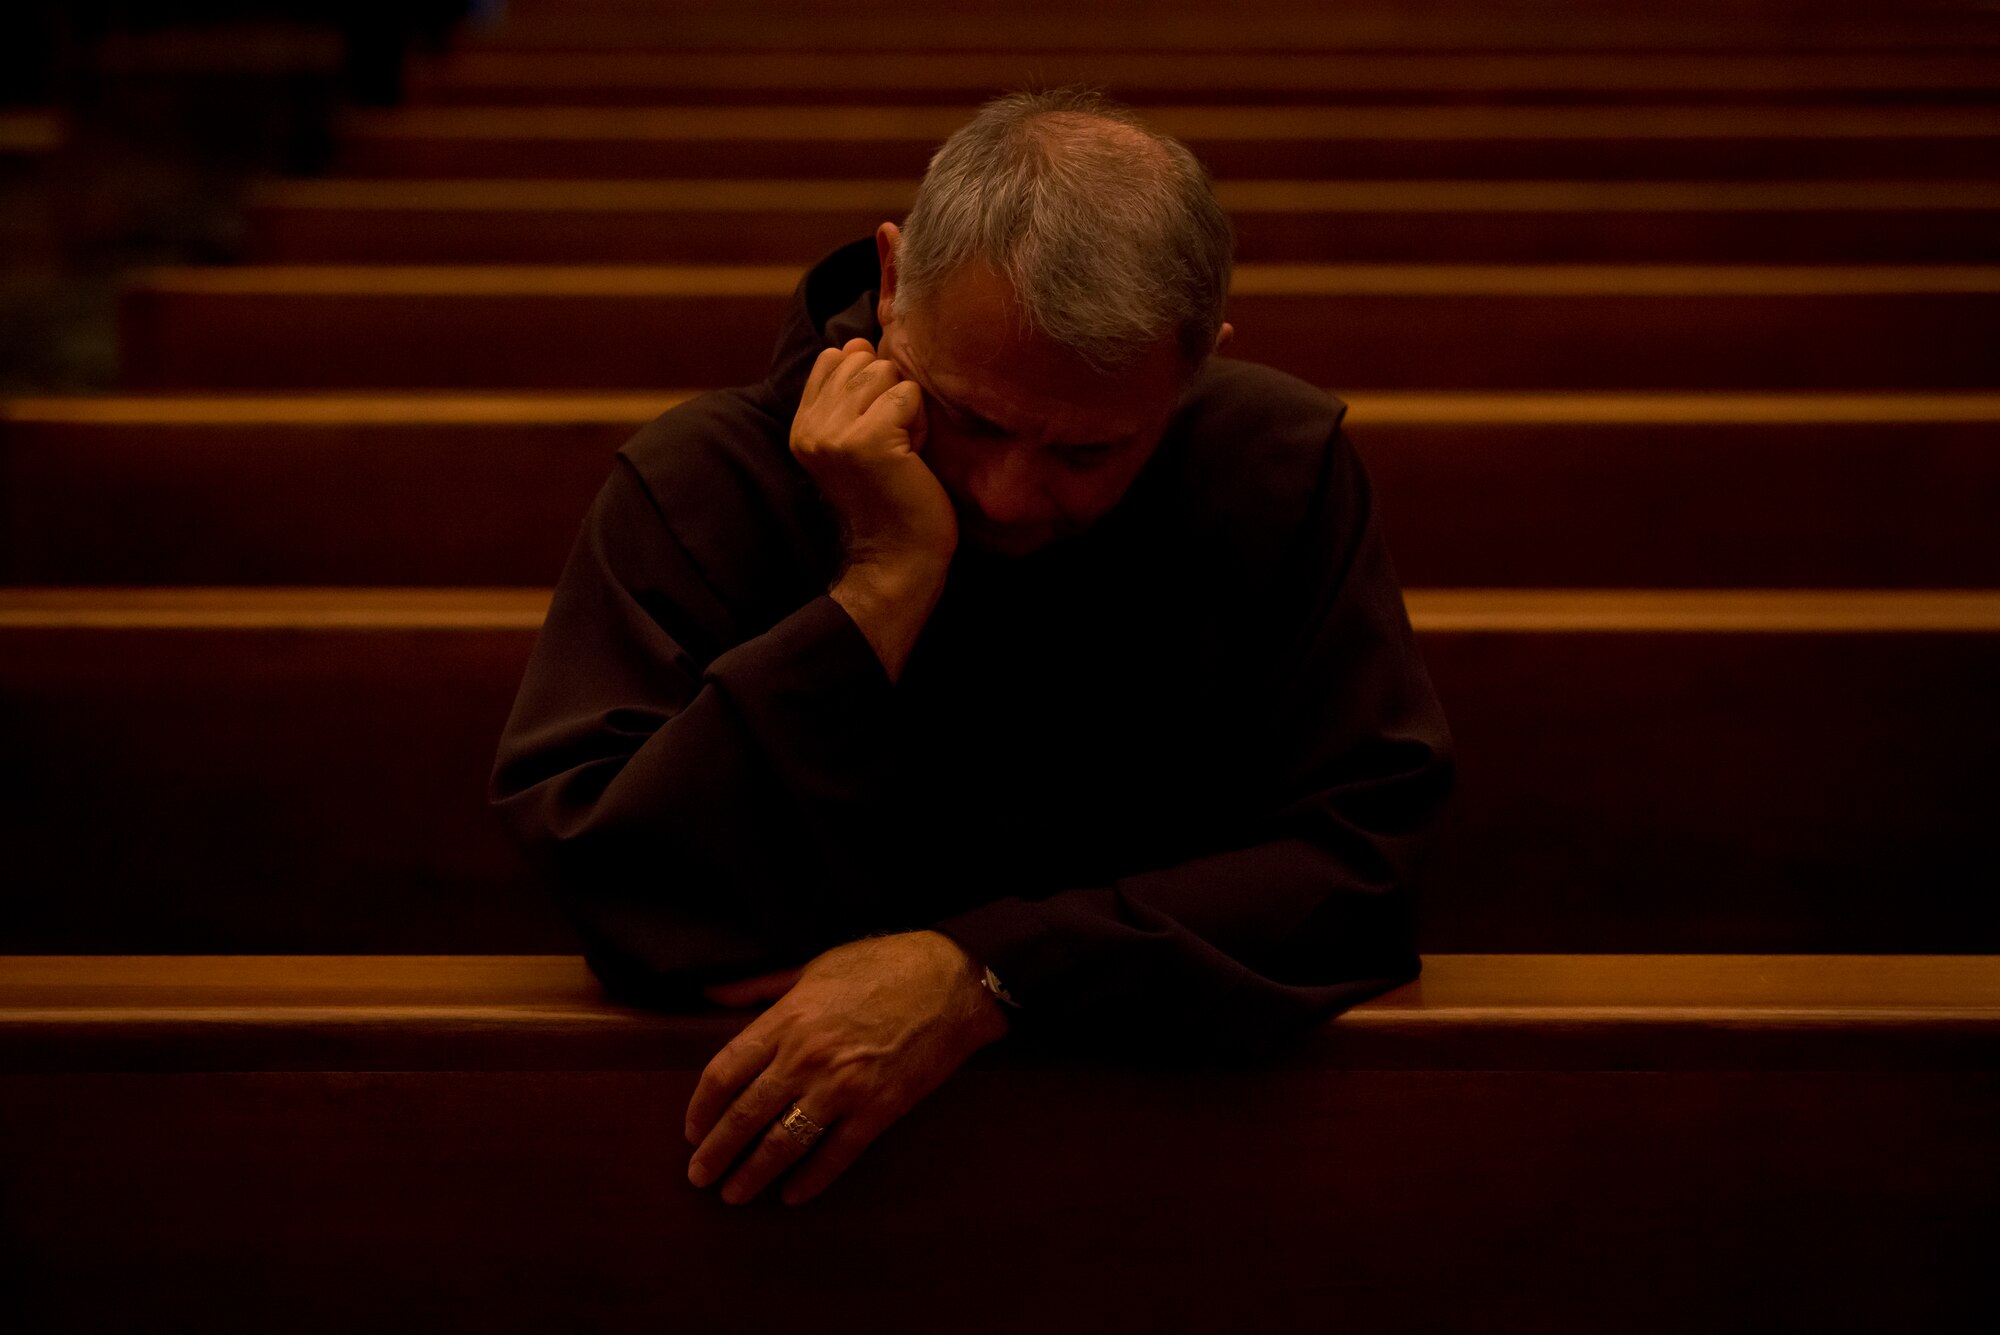 Retired Chaplain (Lt. Col.) Robert Bruno prays while in the campus chapel at the Pontifical Northern American College in Vatican City. Bruno participated in a sabbatical program that allowed him to rest to focus on himself after several decades of providing spiritual service to others while in the Air Force. (U.S. Air Force photo/Staff Sgt. Andrew Lee)